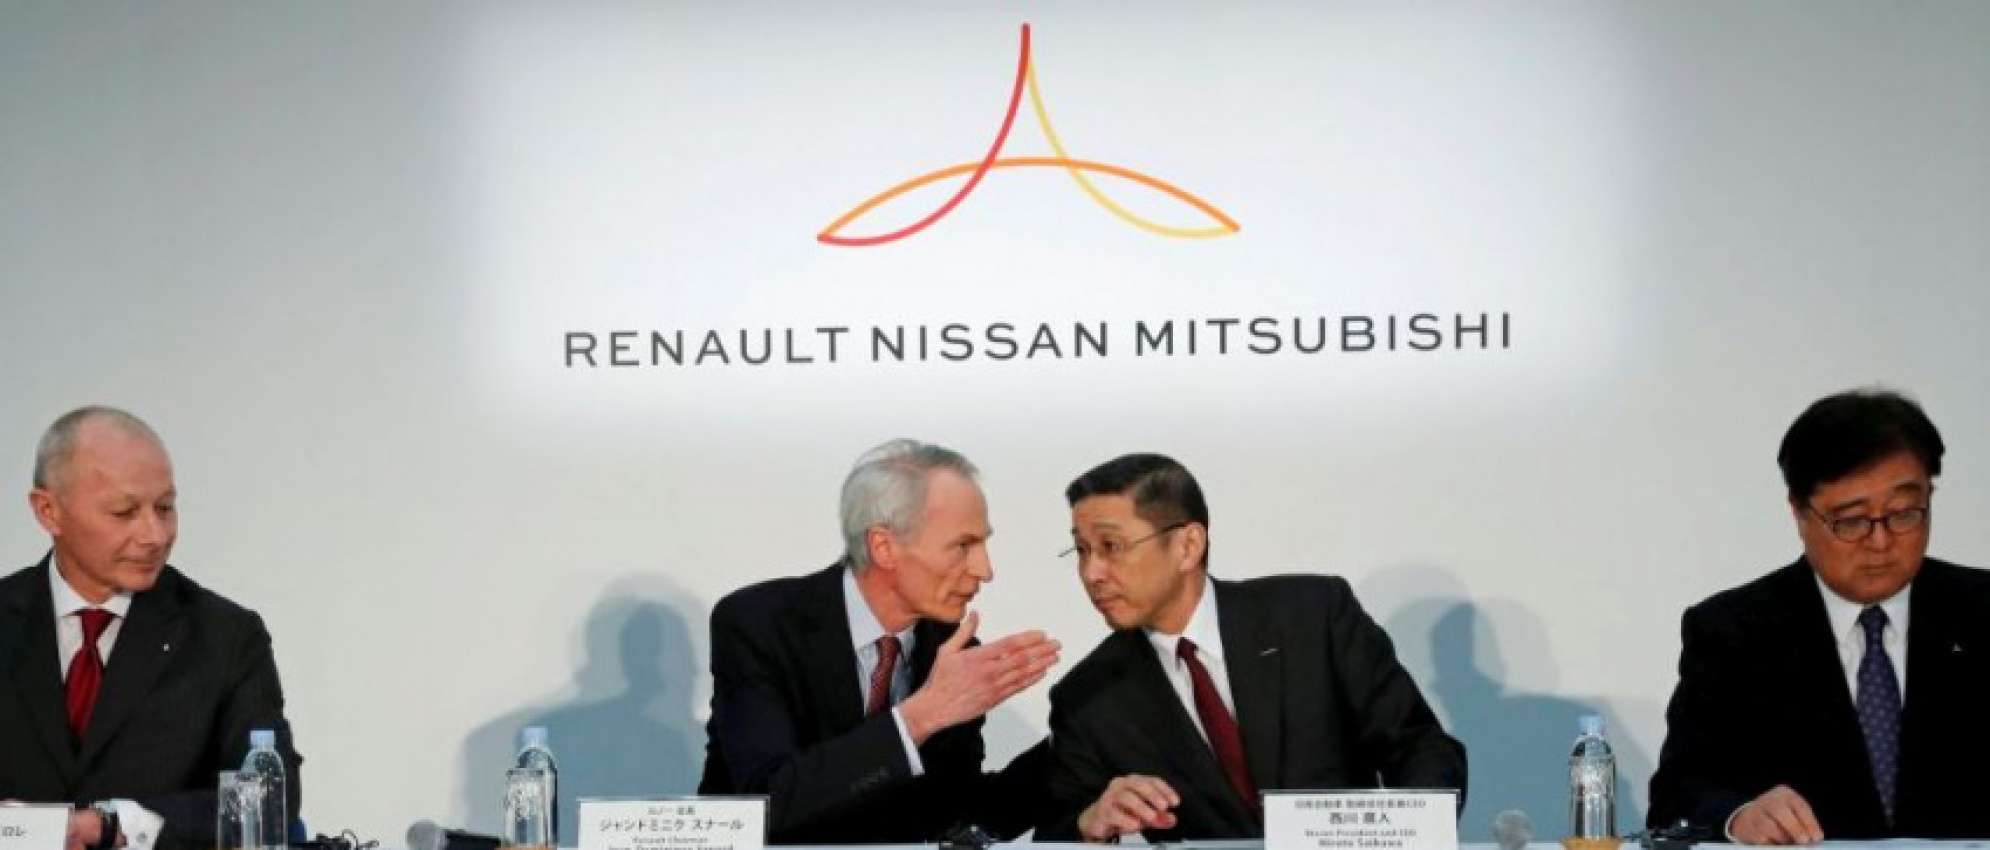 autos, cars, nissan, renault, autos nissan, nissan, renault break up almighty chairmanship in wake of ghosn's ouster